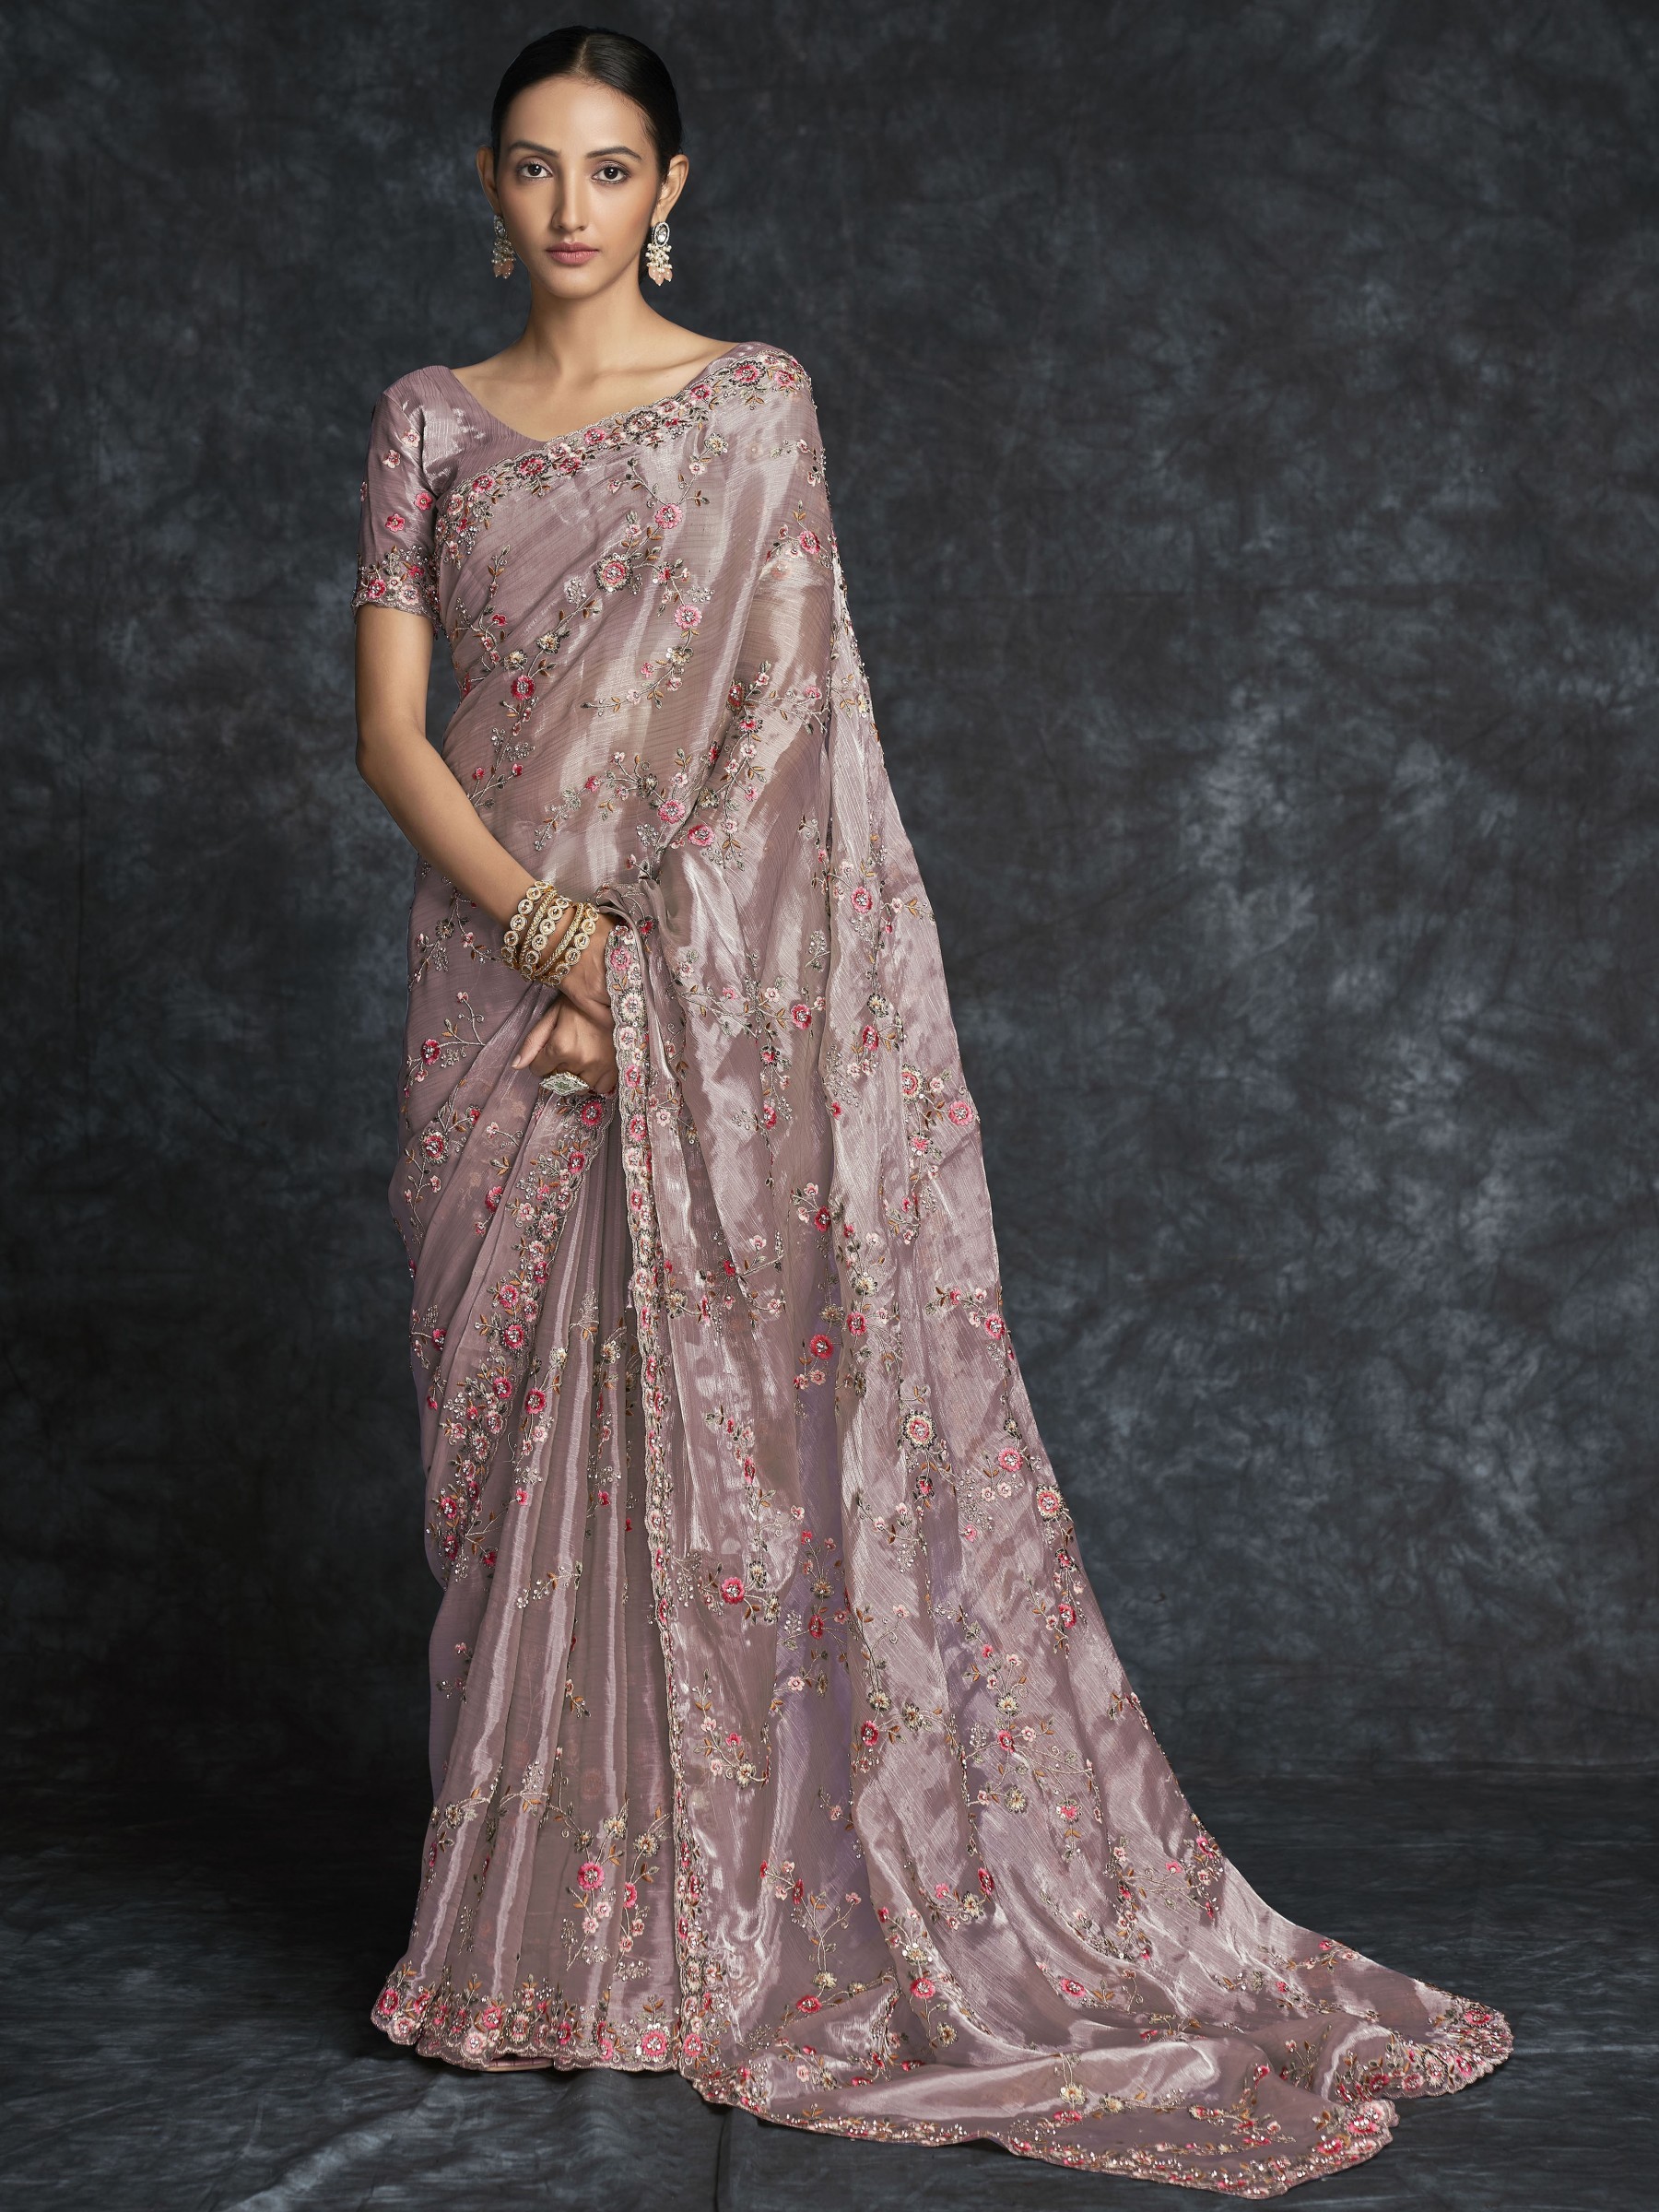 Organza Saree In Light Pink Color With Embroidery Work